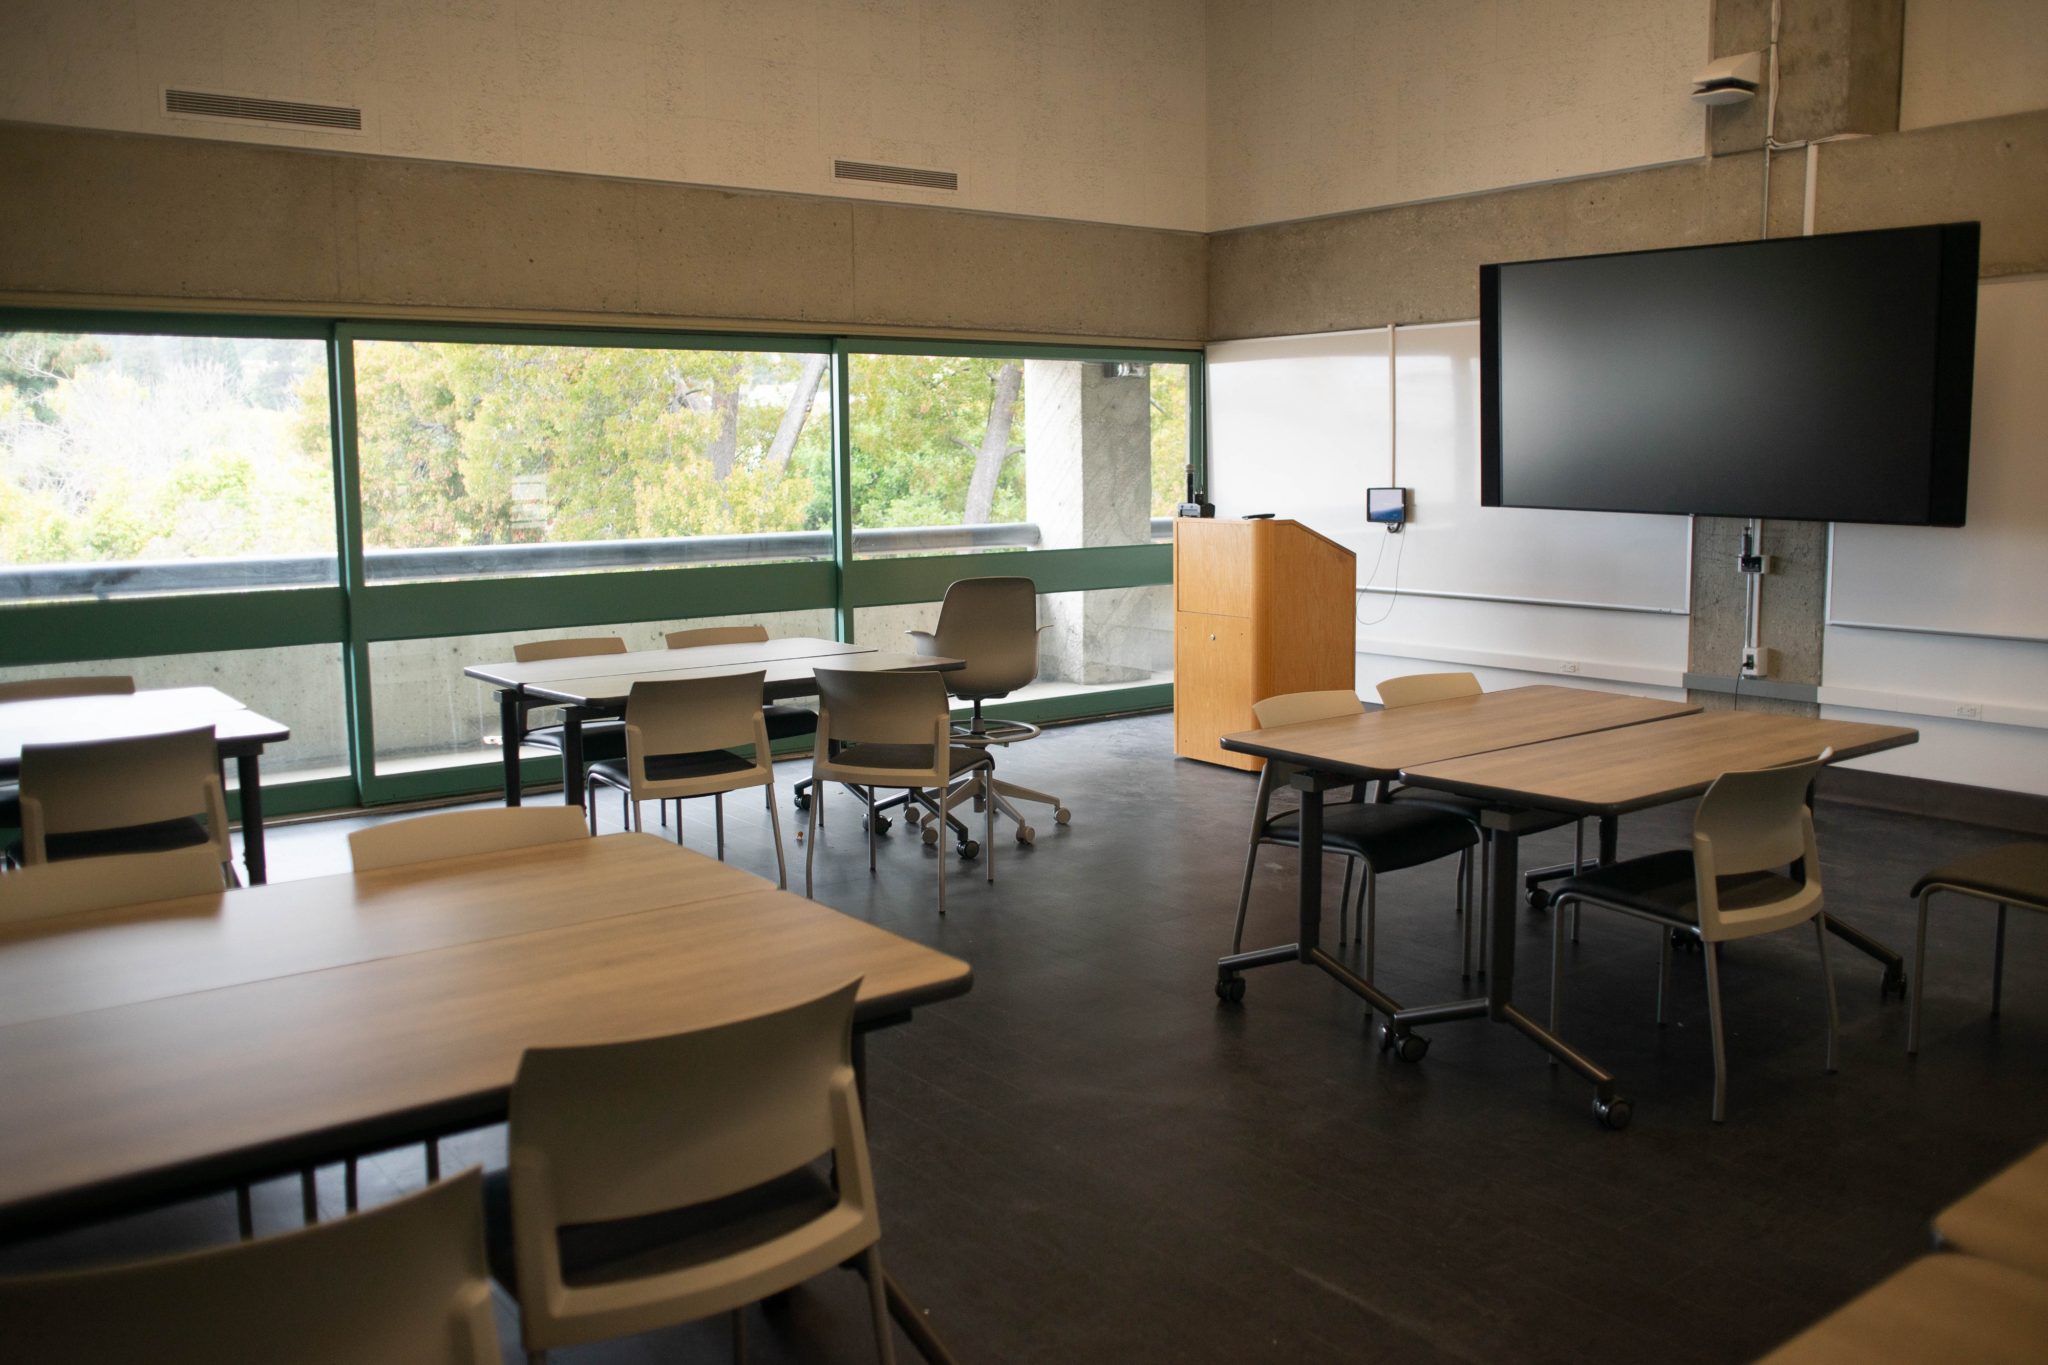 One of the classrooms in Mudd Hall, with groups of tables in front of a podium.